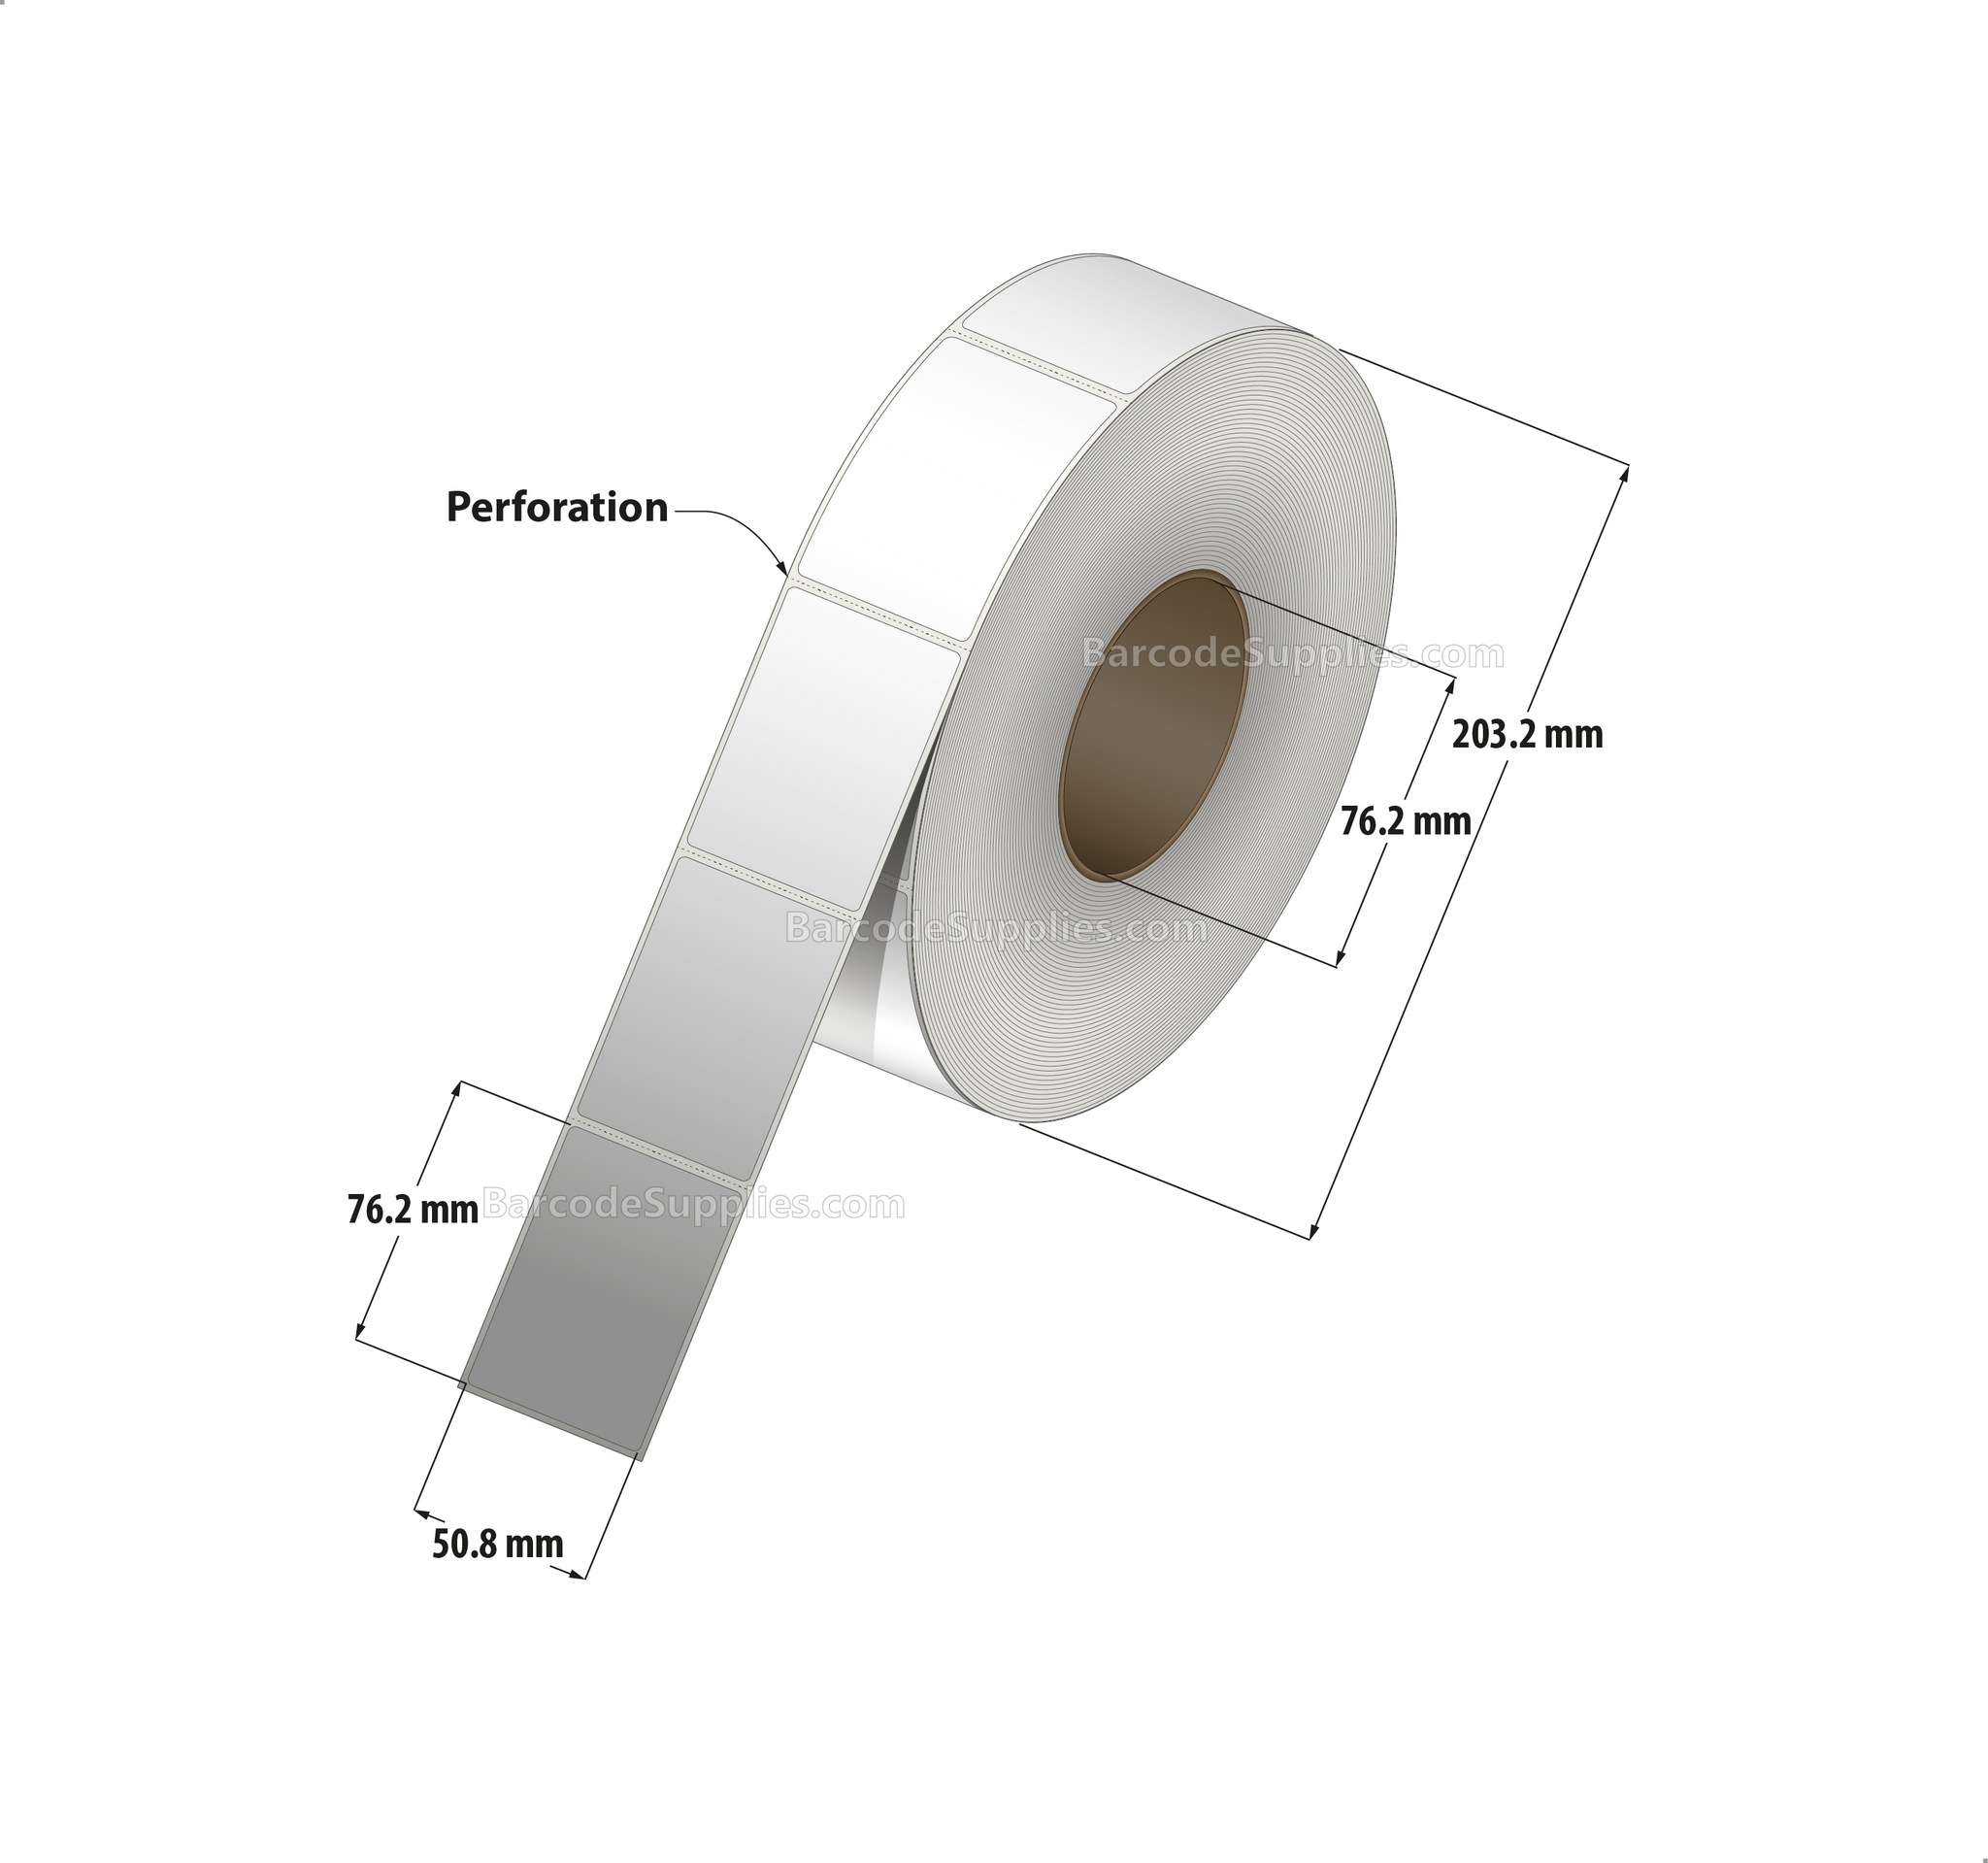 2 x 3 Direct Thermal White Labels With Acrylic Adhesive - Perforated - 1900 Labels Per Roll - Carton Of 8 Rolls - 15200 Labels Total - MPN: RD-2-3-1900-3 - BarcodeSource, Inc.